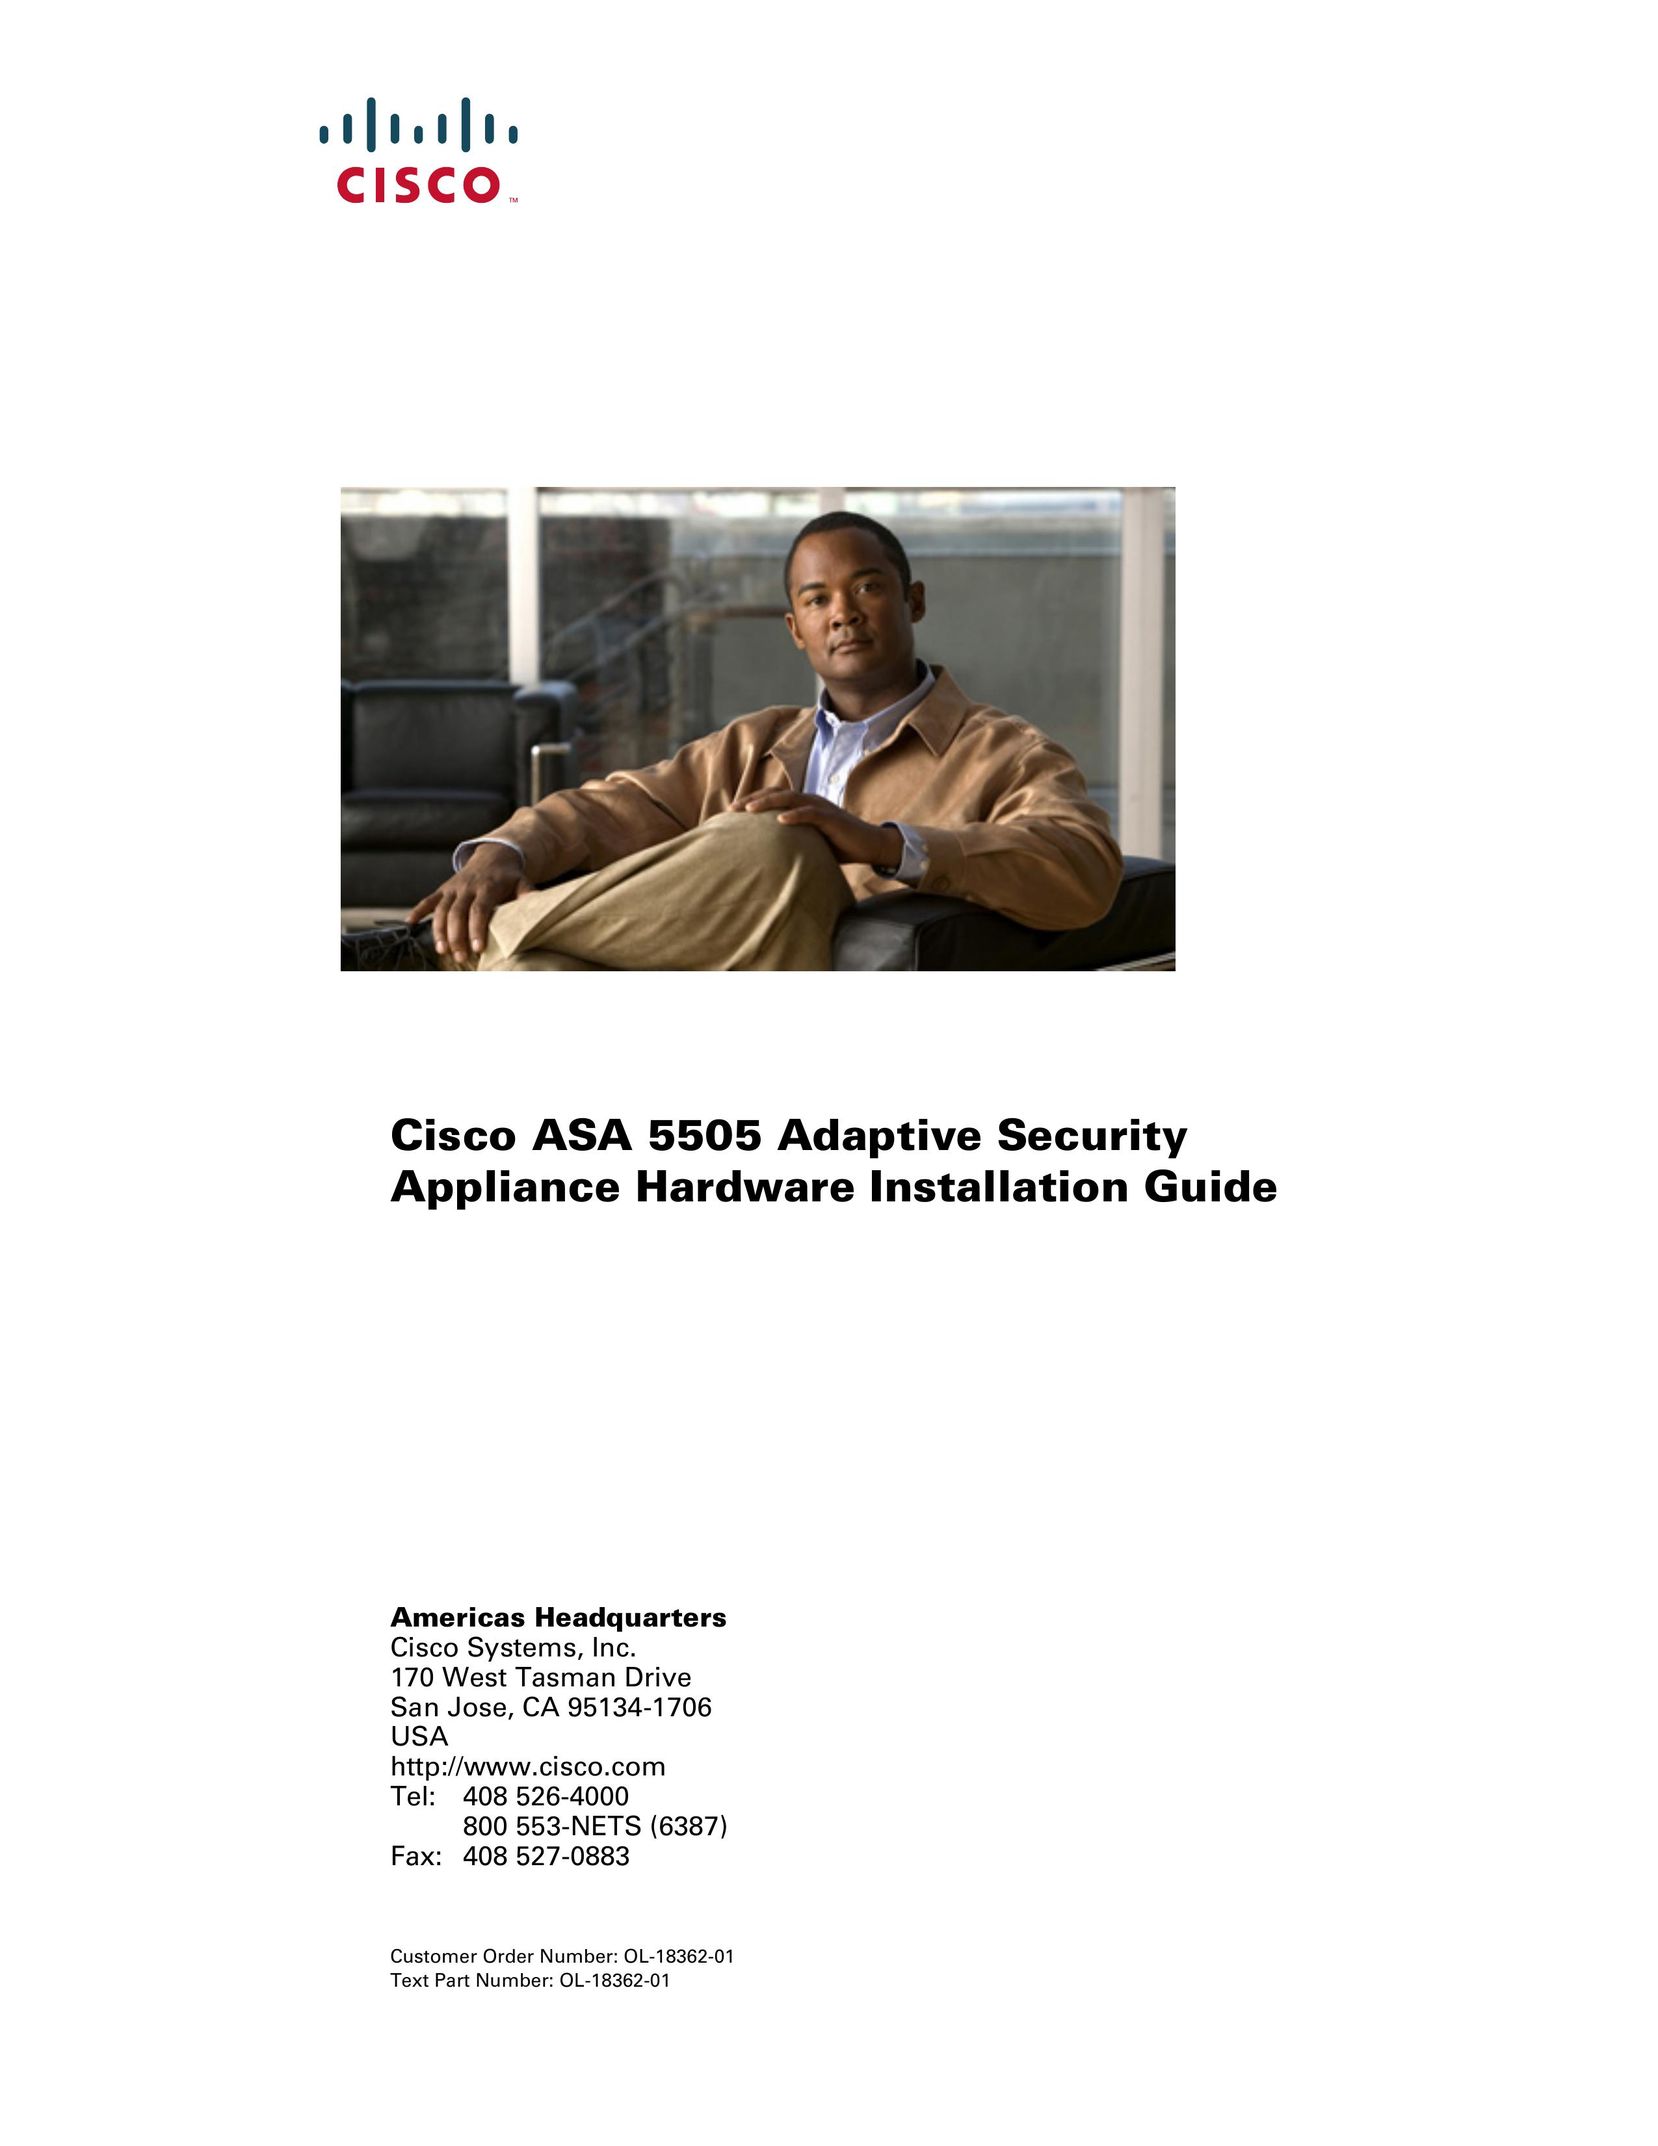 Cisco Systems ASA5505BUNK9 Home Security System User Manual